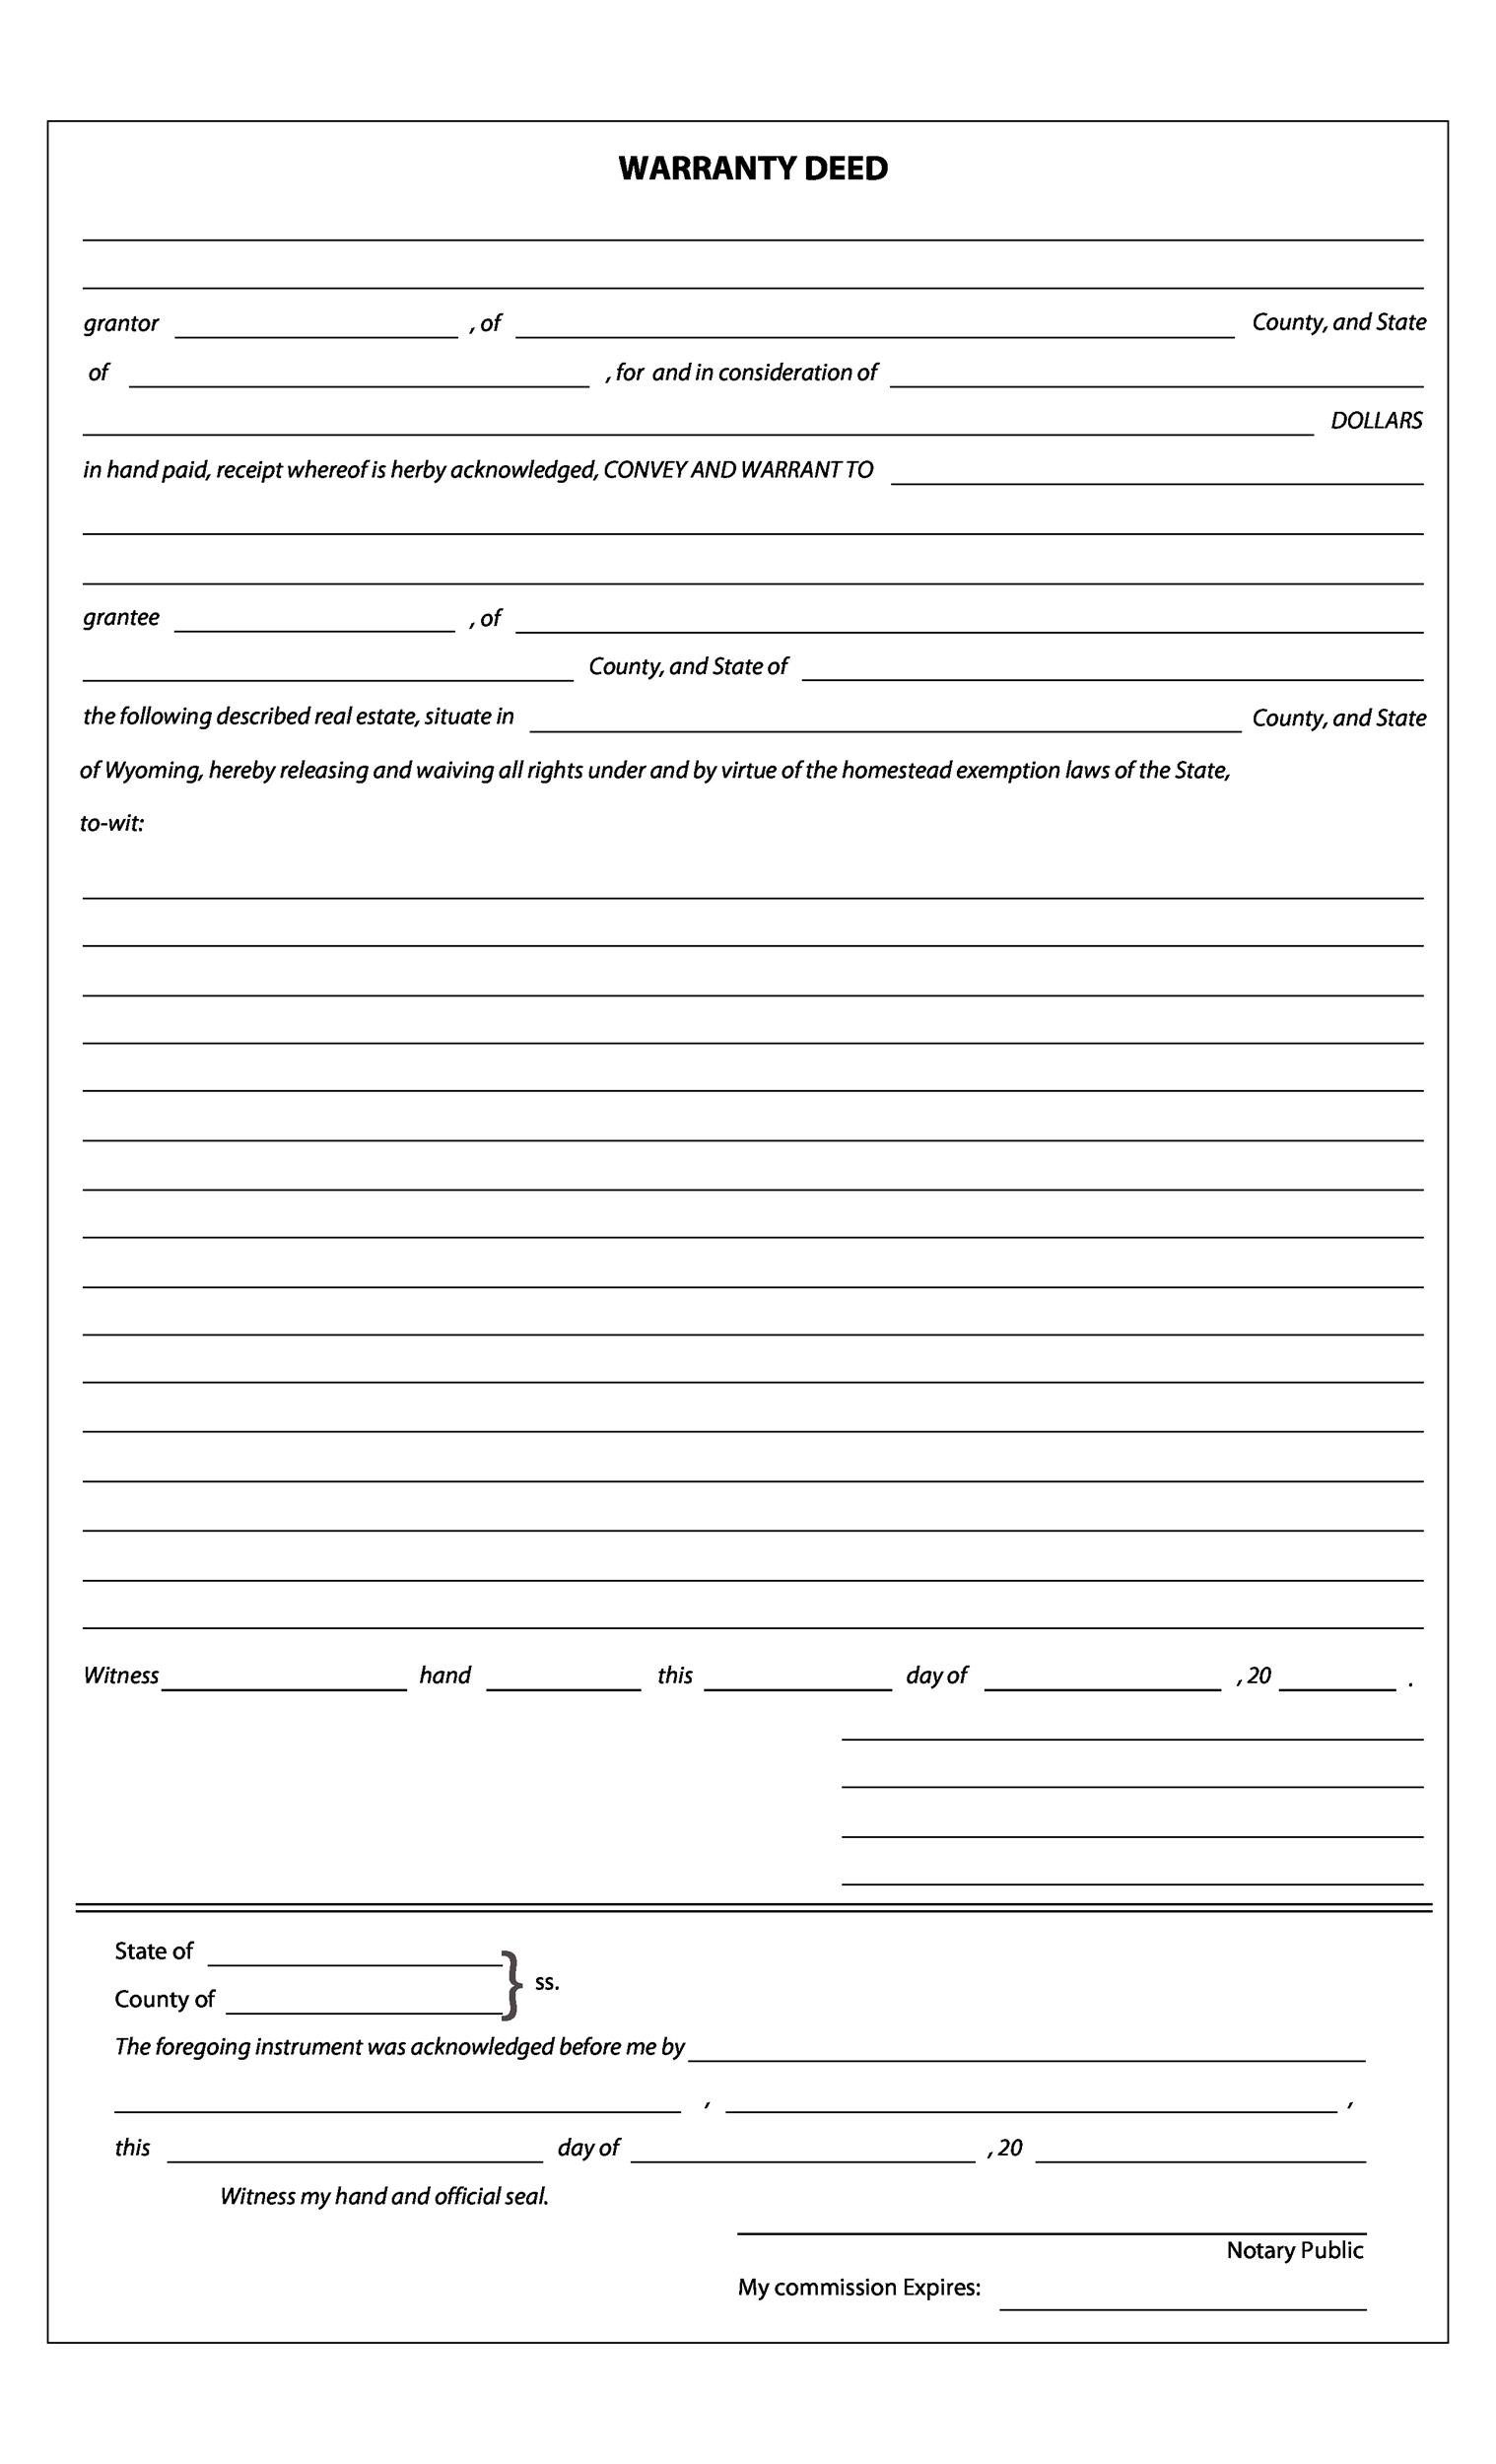 40-warranty-deed-templates-forms-general-special-template-lab